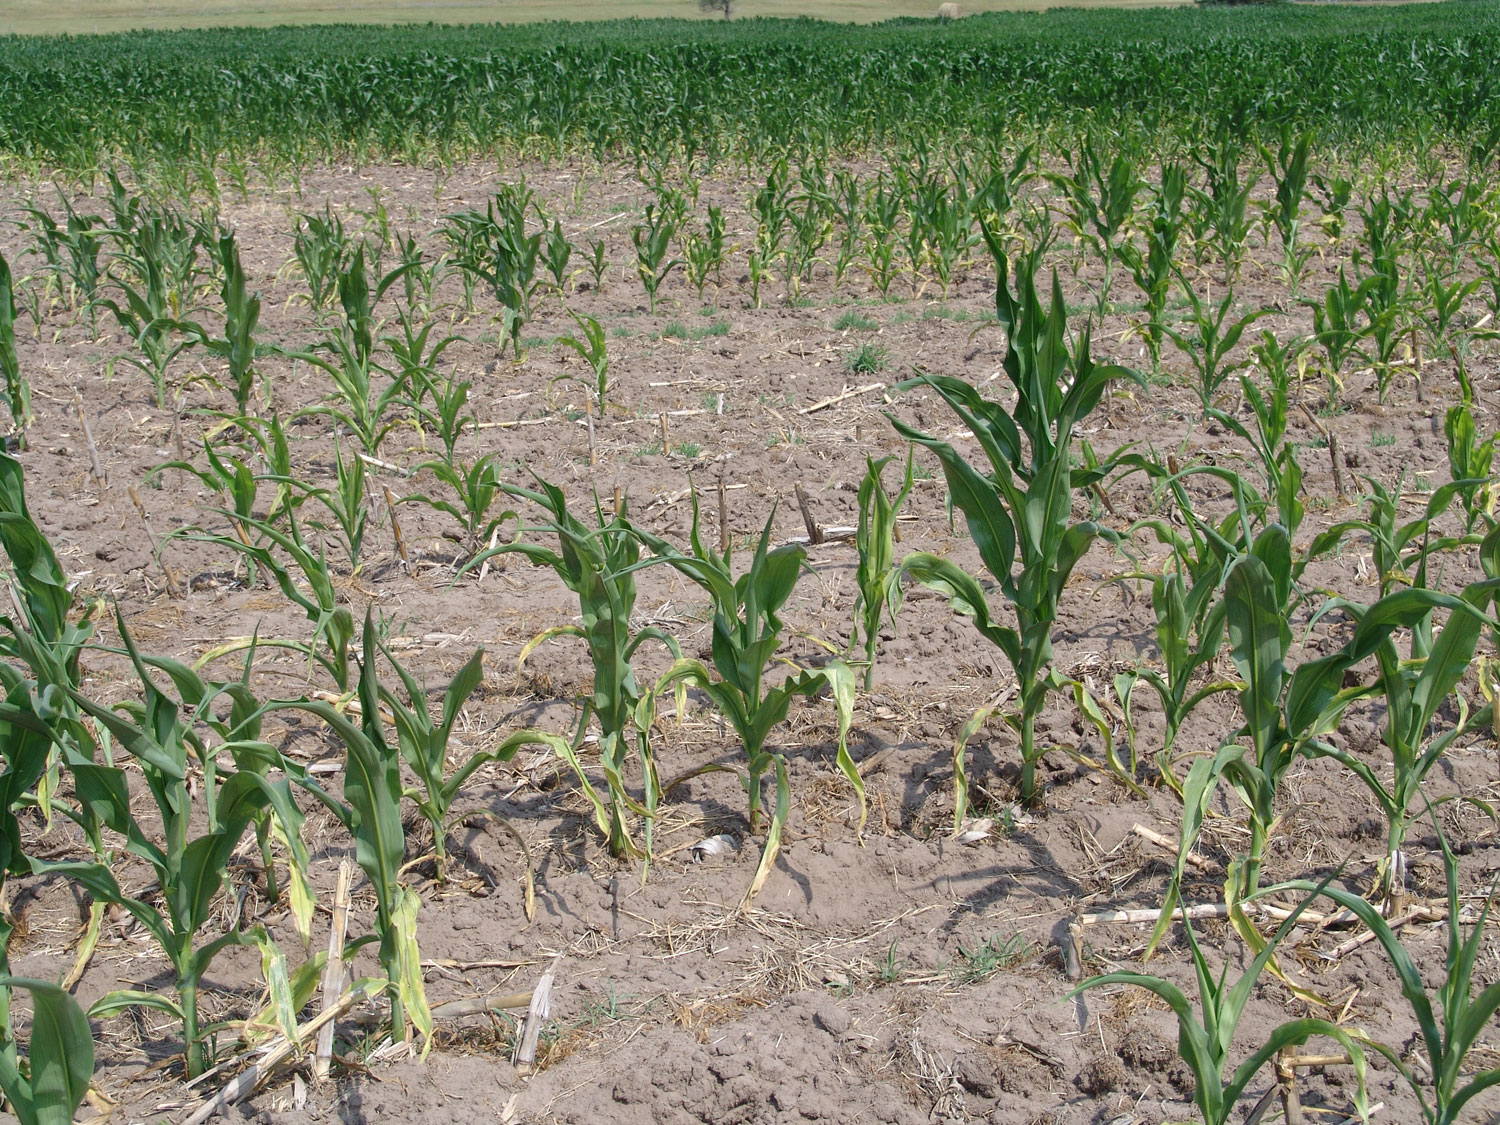 Corn field damage due to low pH